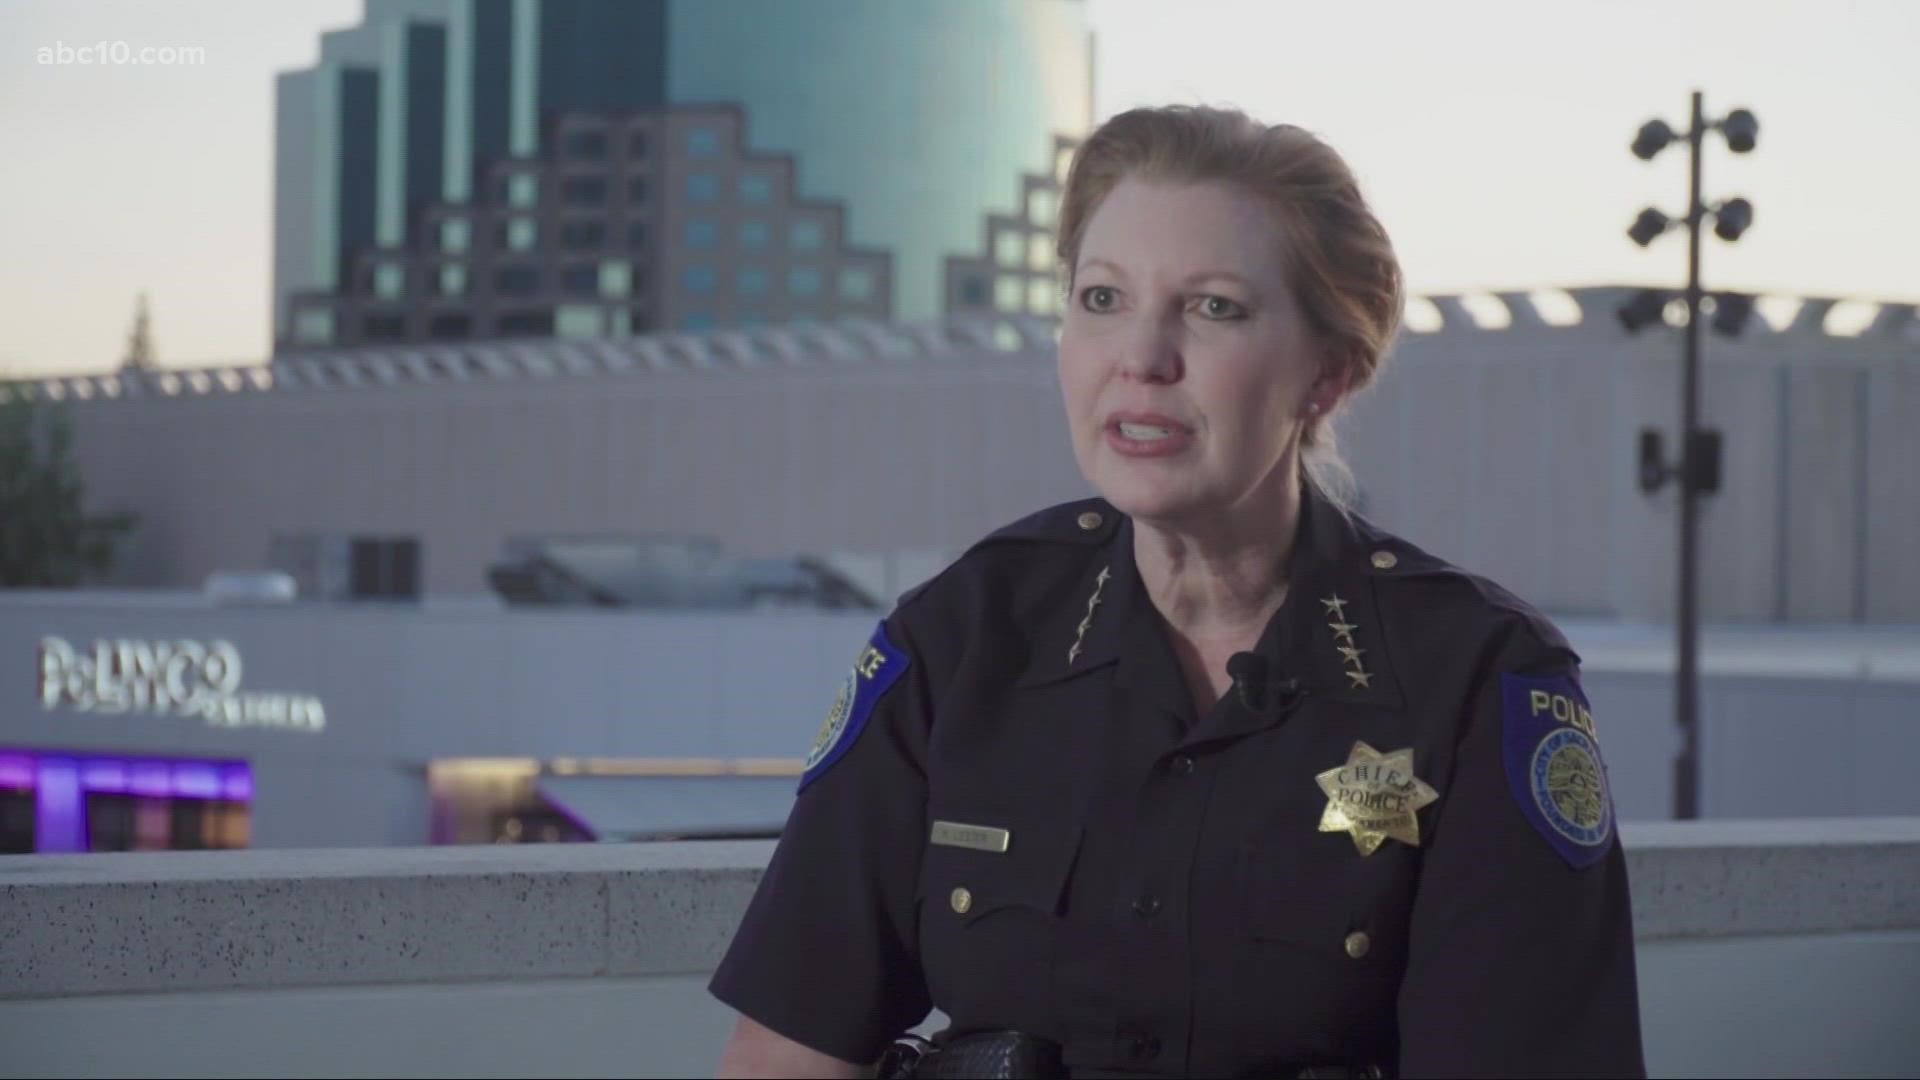 Chief Lester sat down with ABC10 to discuss what's on her agenda as she leads the department.